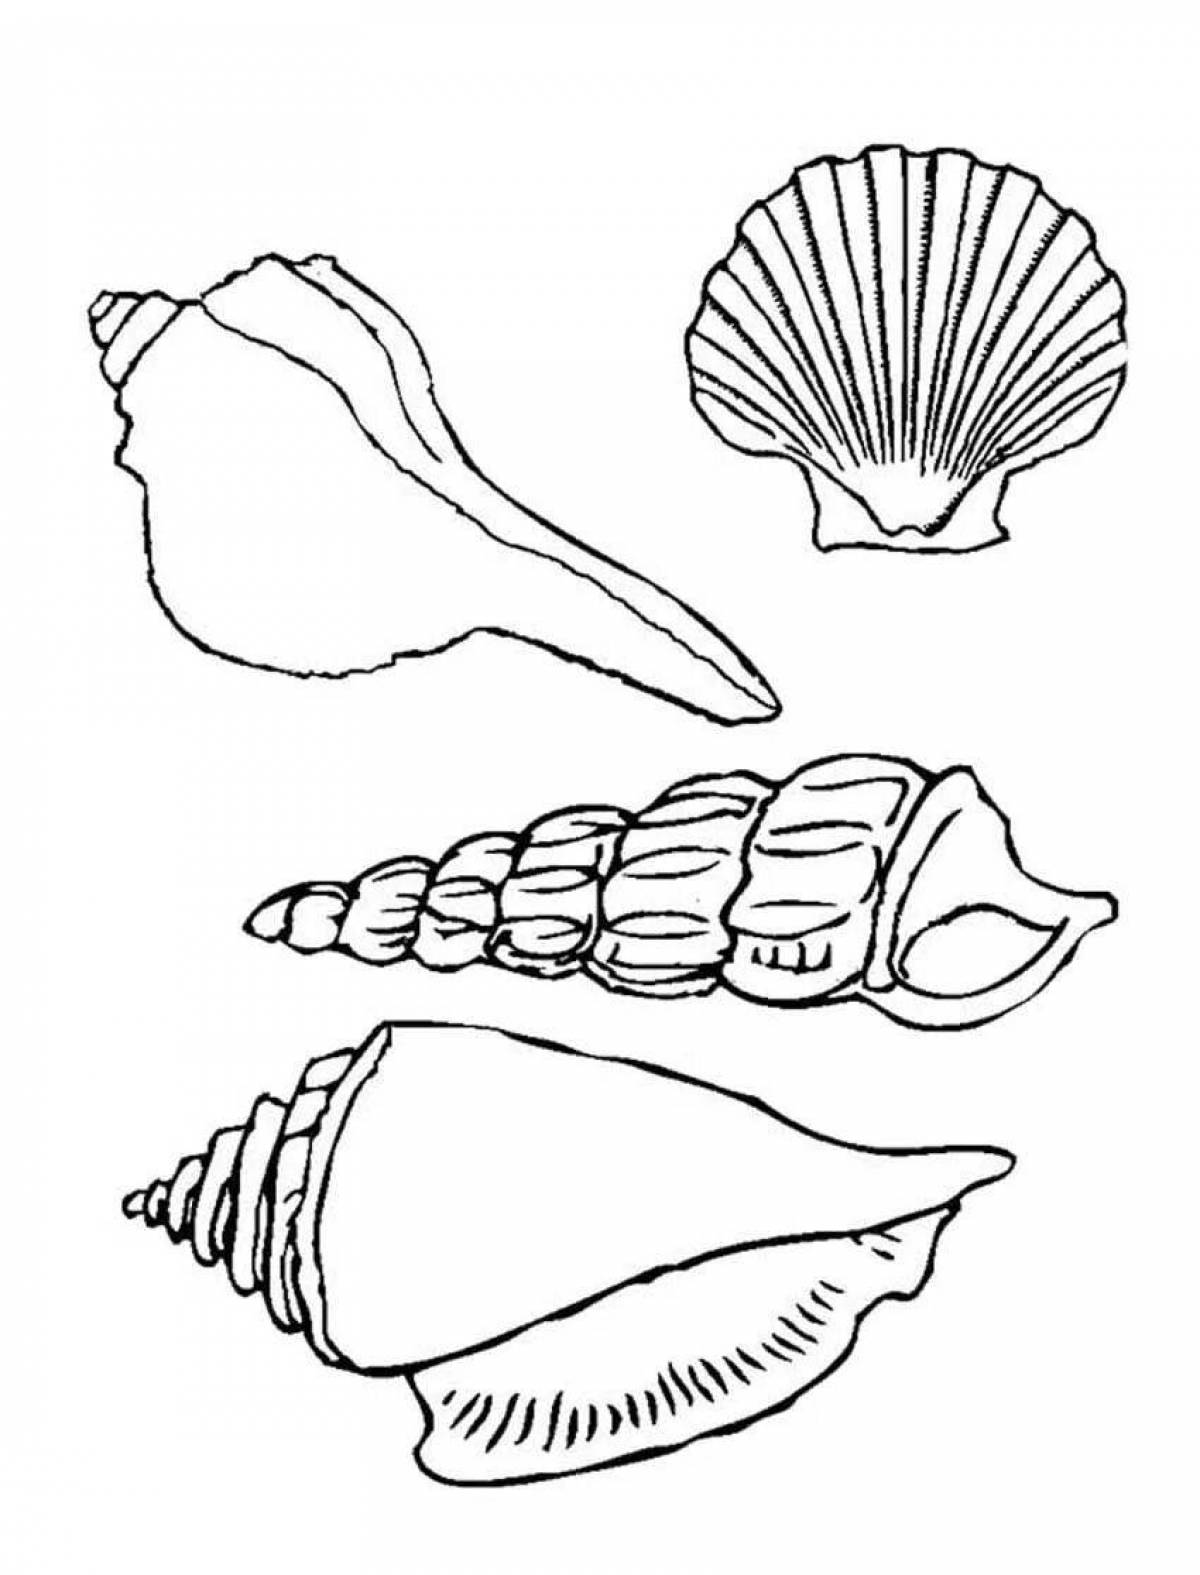 Fun shell coloring for kids